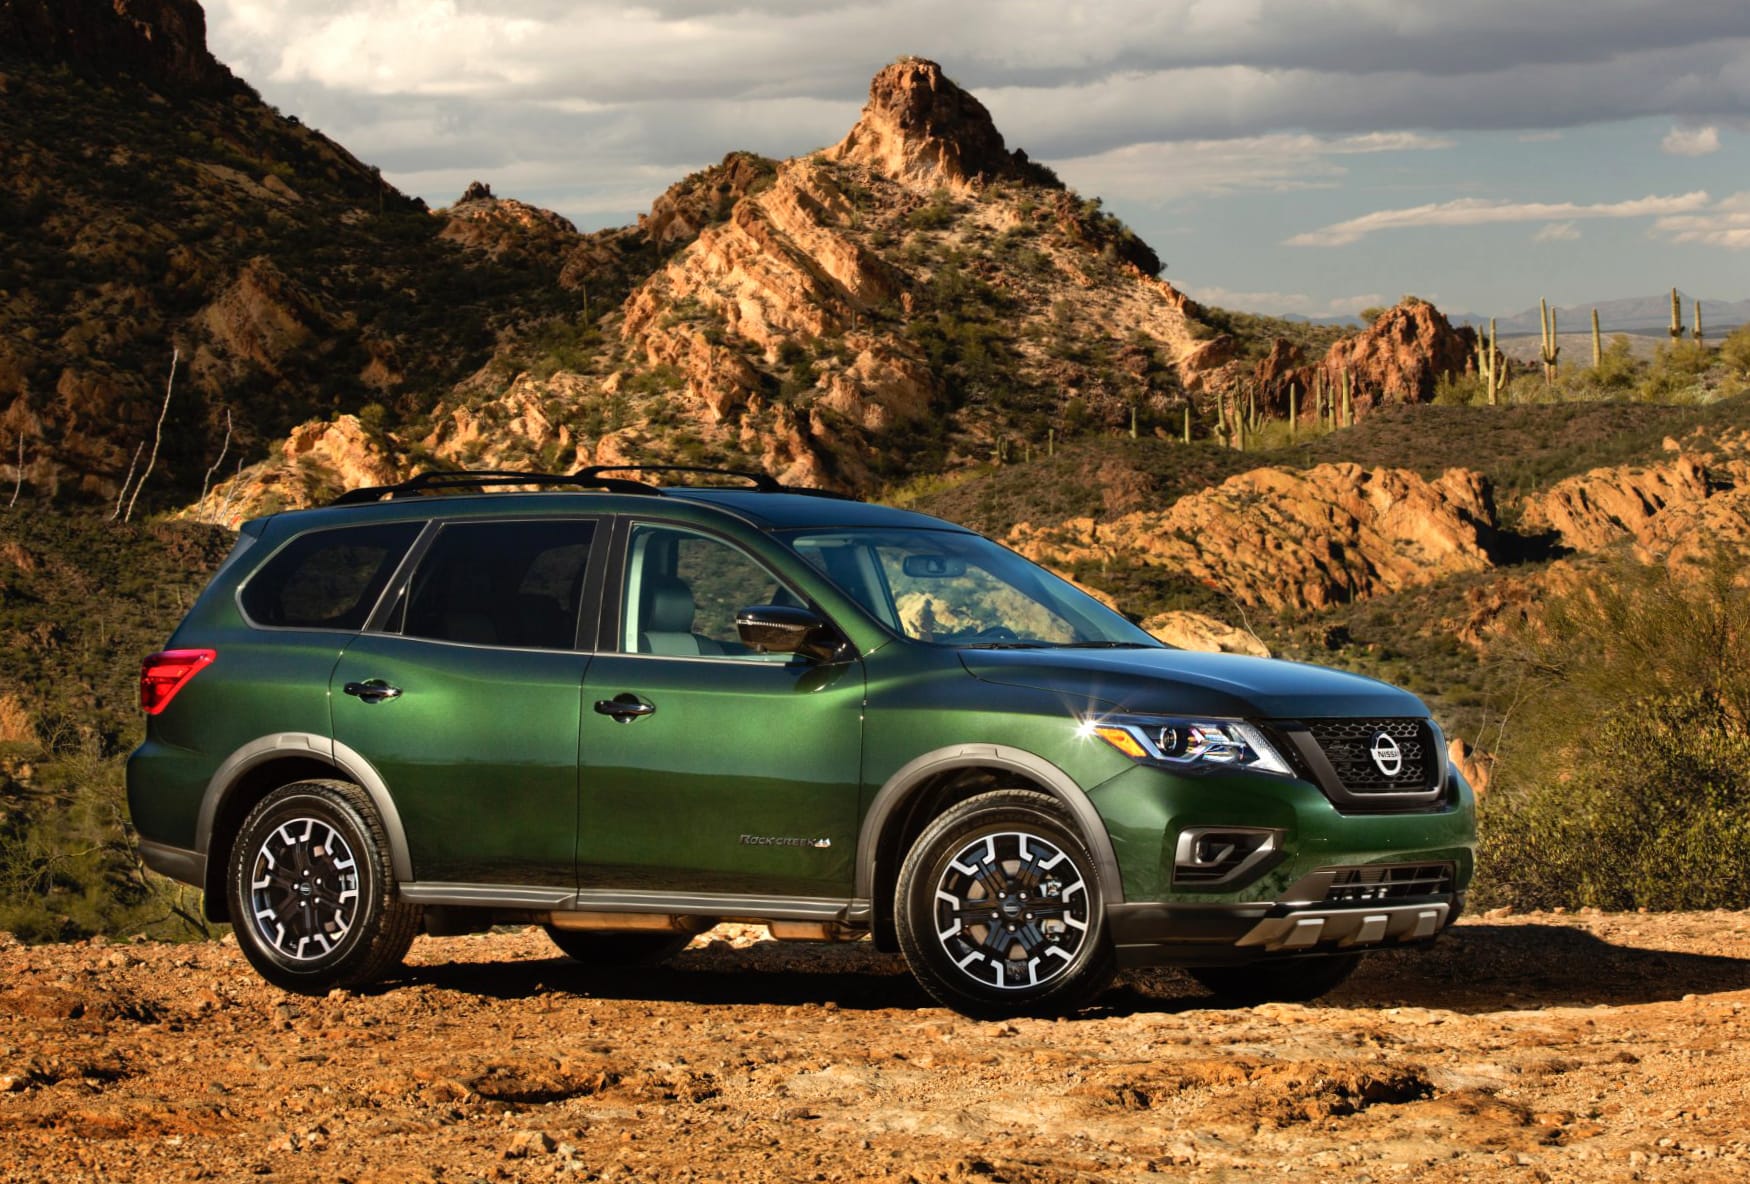 Nissan Pathfinder wallpapers HD quality